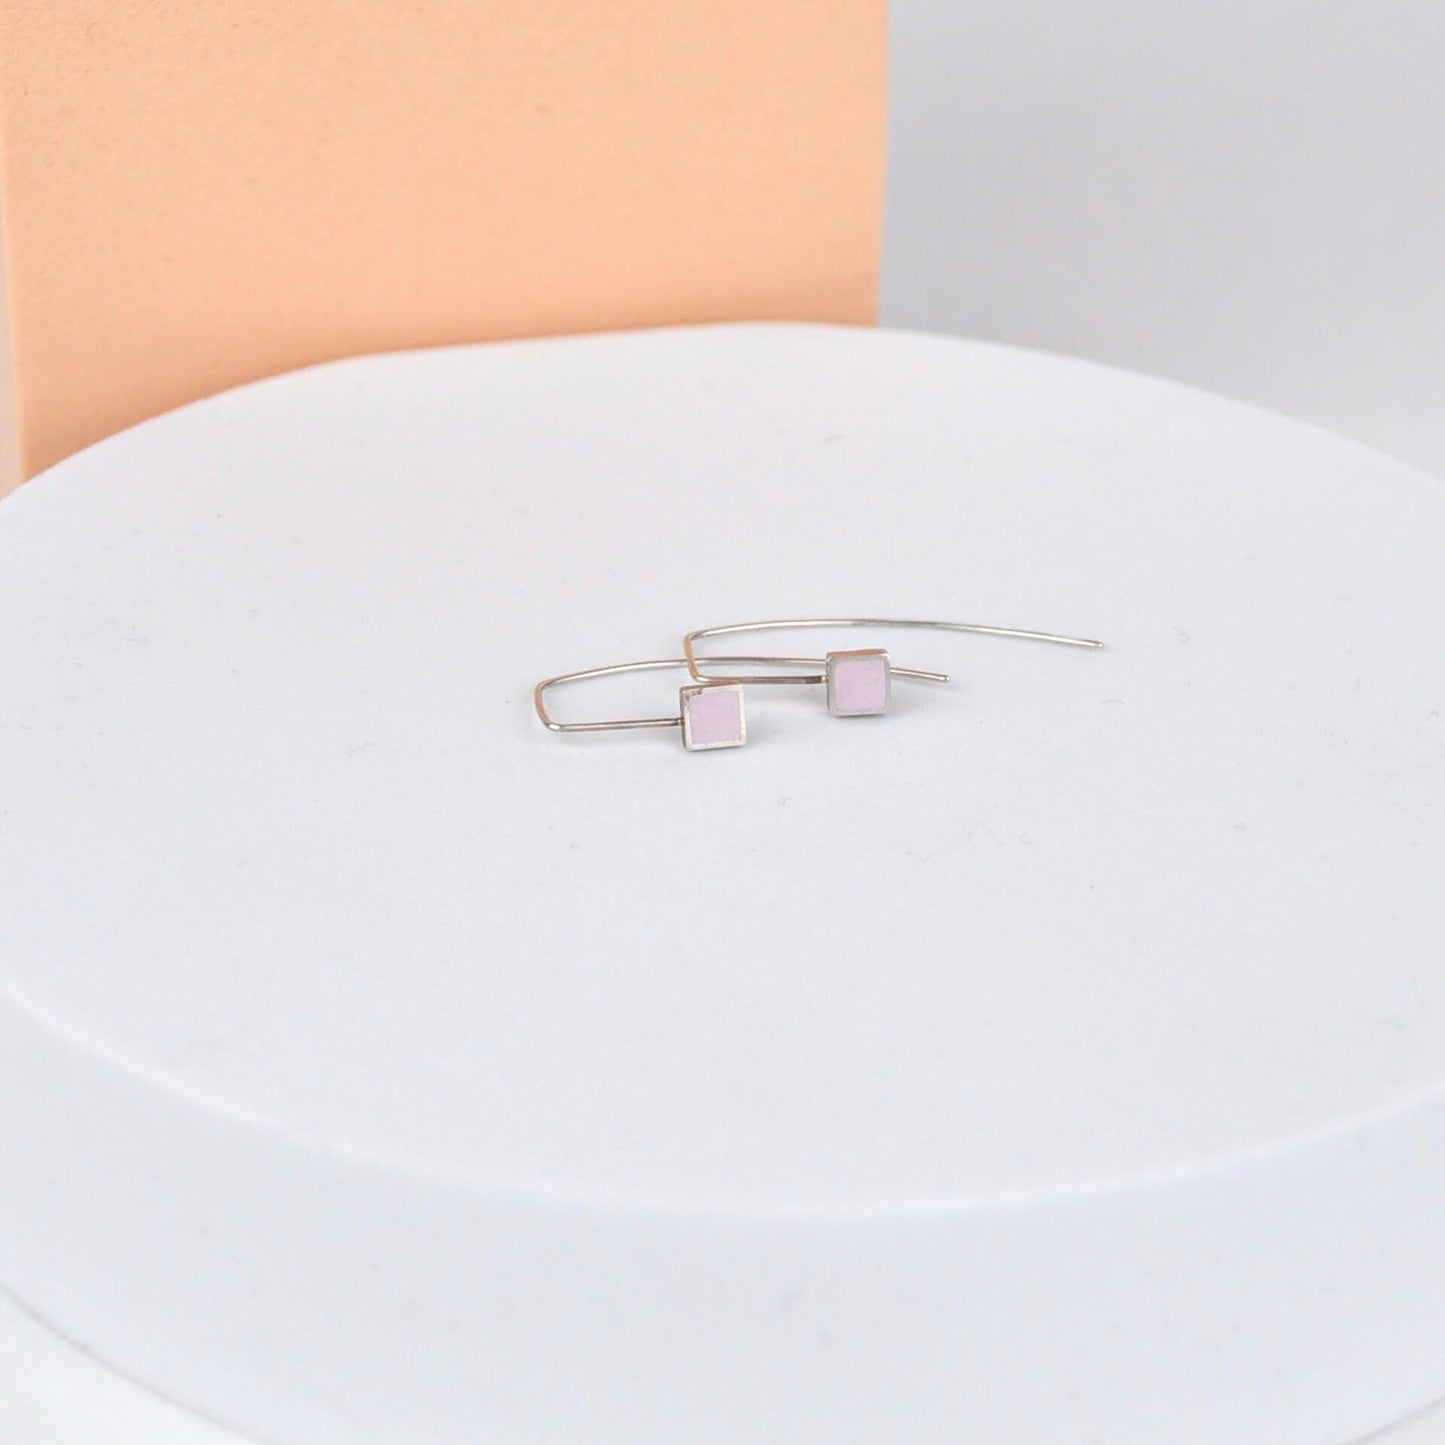 Clare Lloyd Earrings Pink Contemporary Square Wire Earrings (various colours)